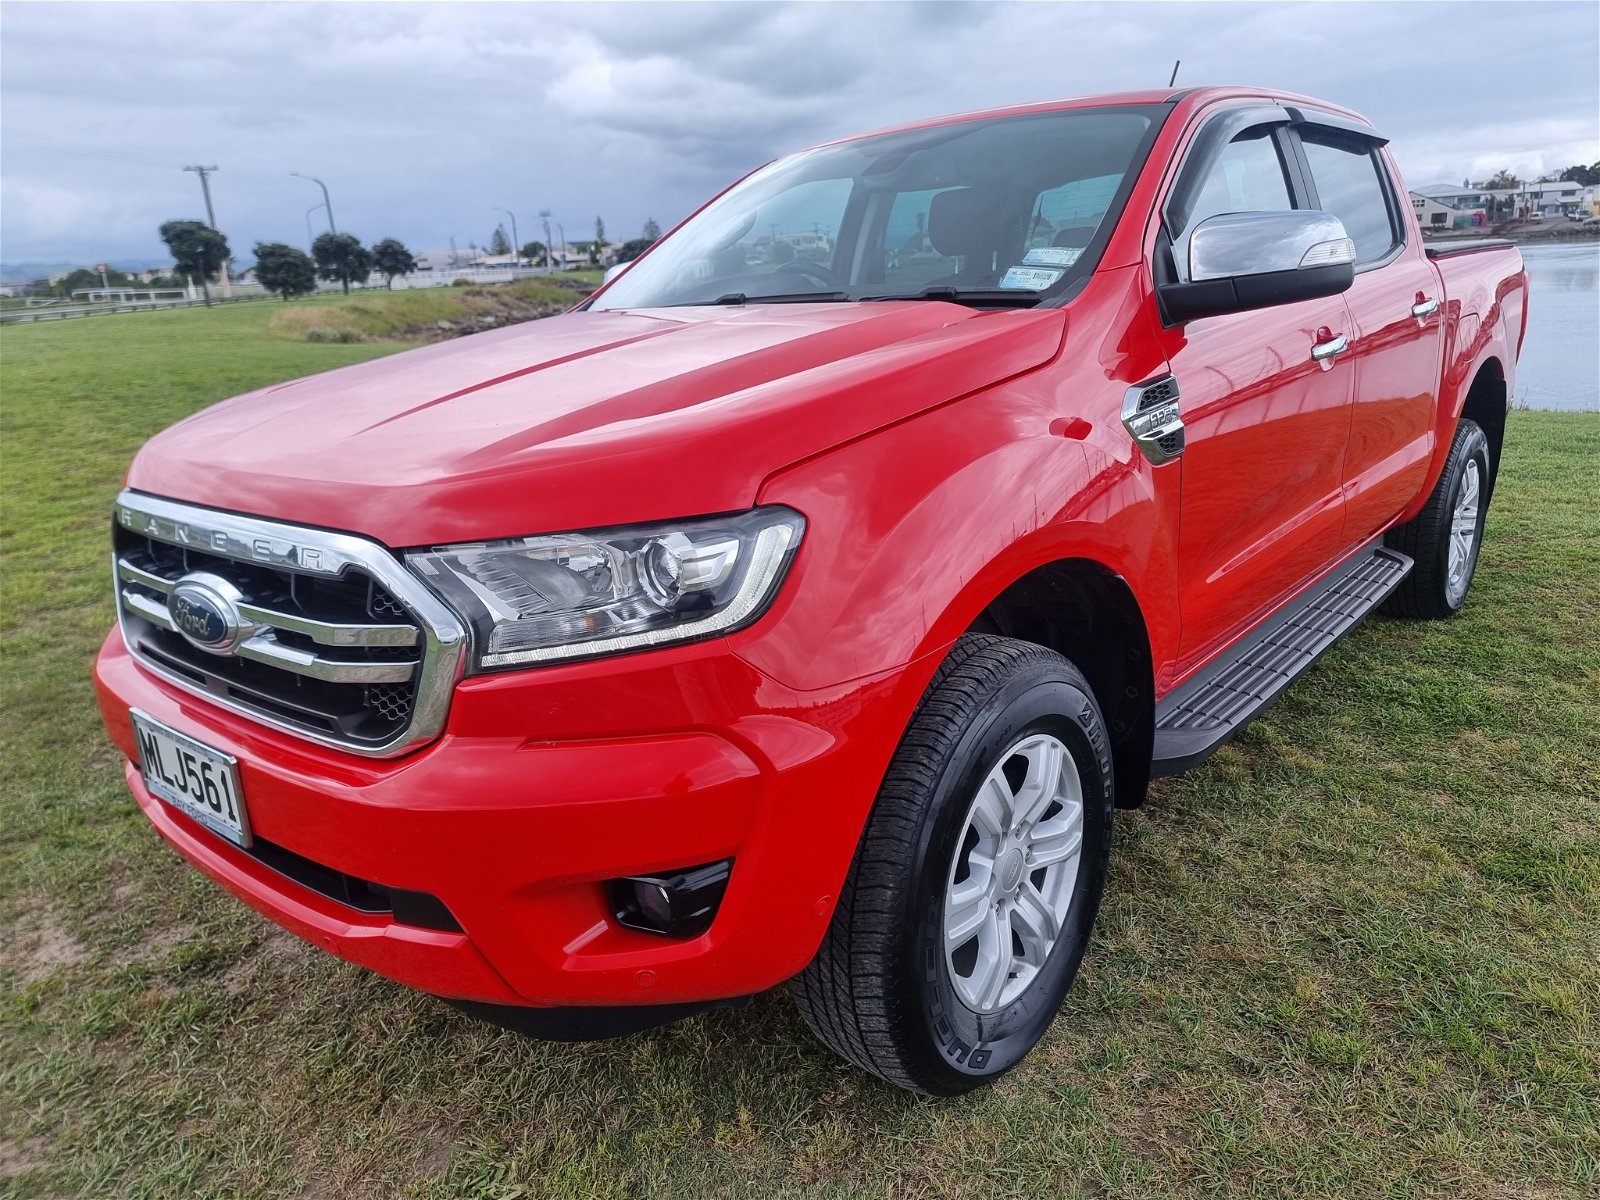 2019 Ford Ranger Xlt Double Cab W/S 3